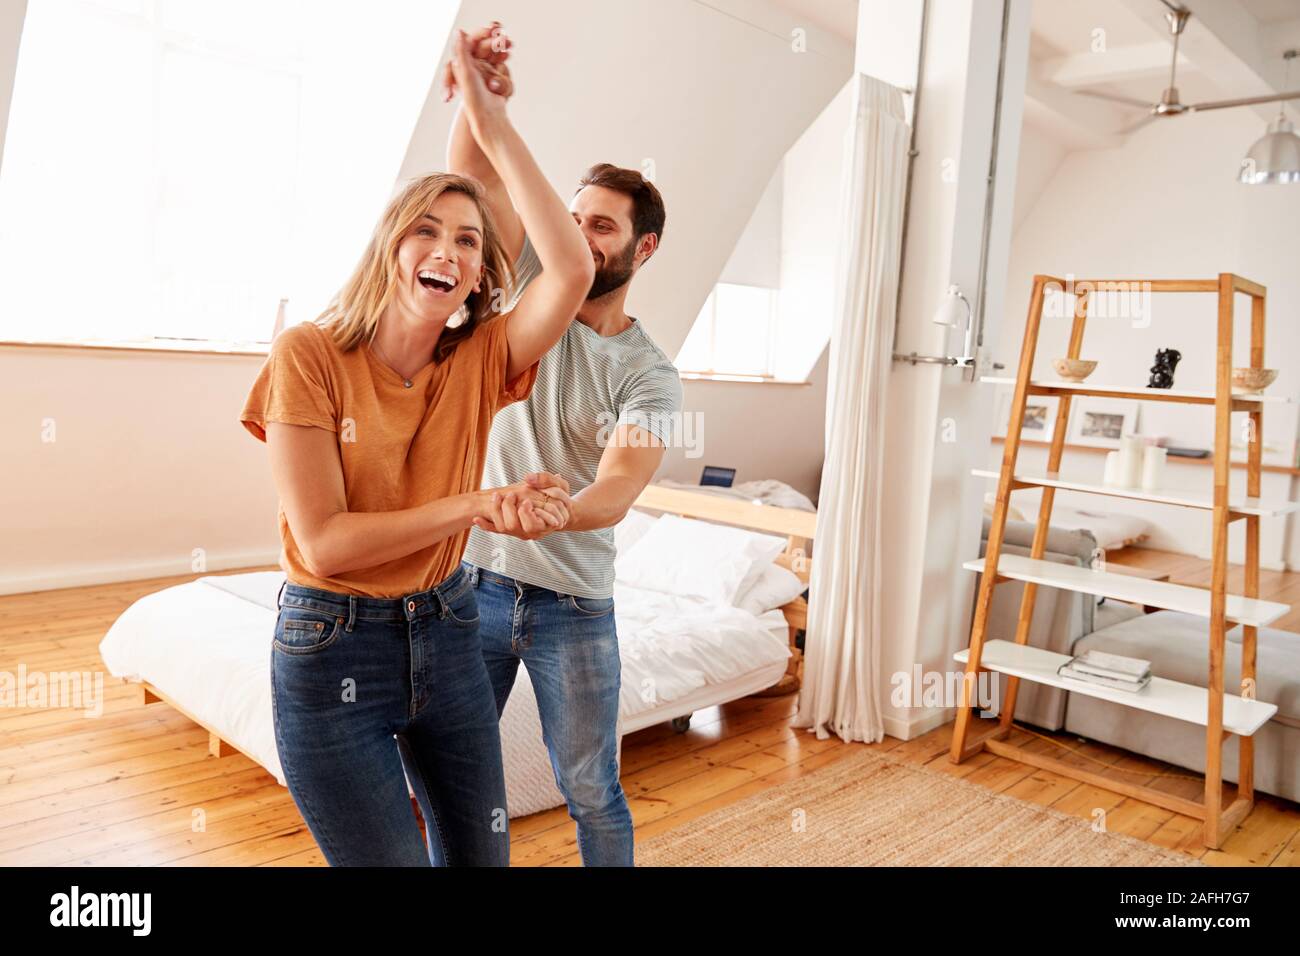 Couple Having Fun In New Home Dancing Together Stock Photo